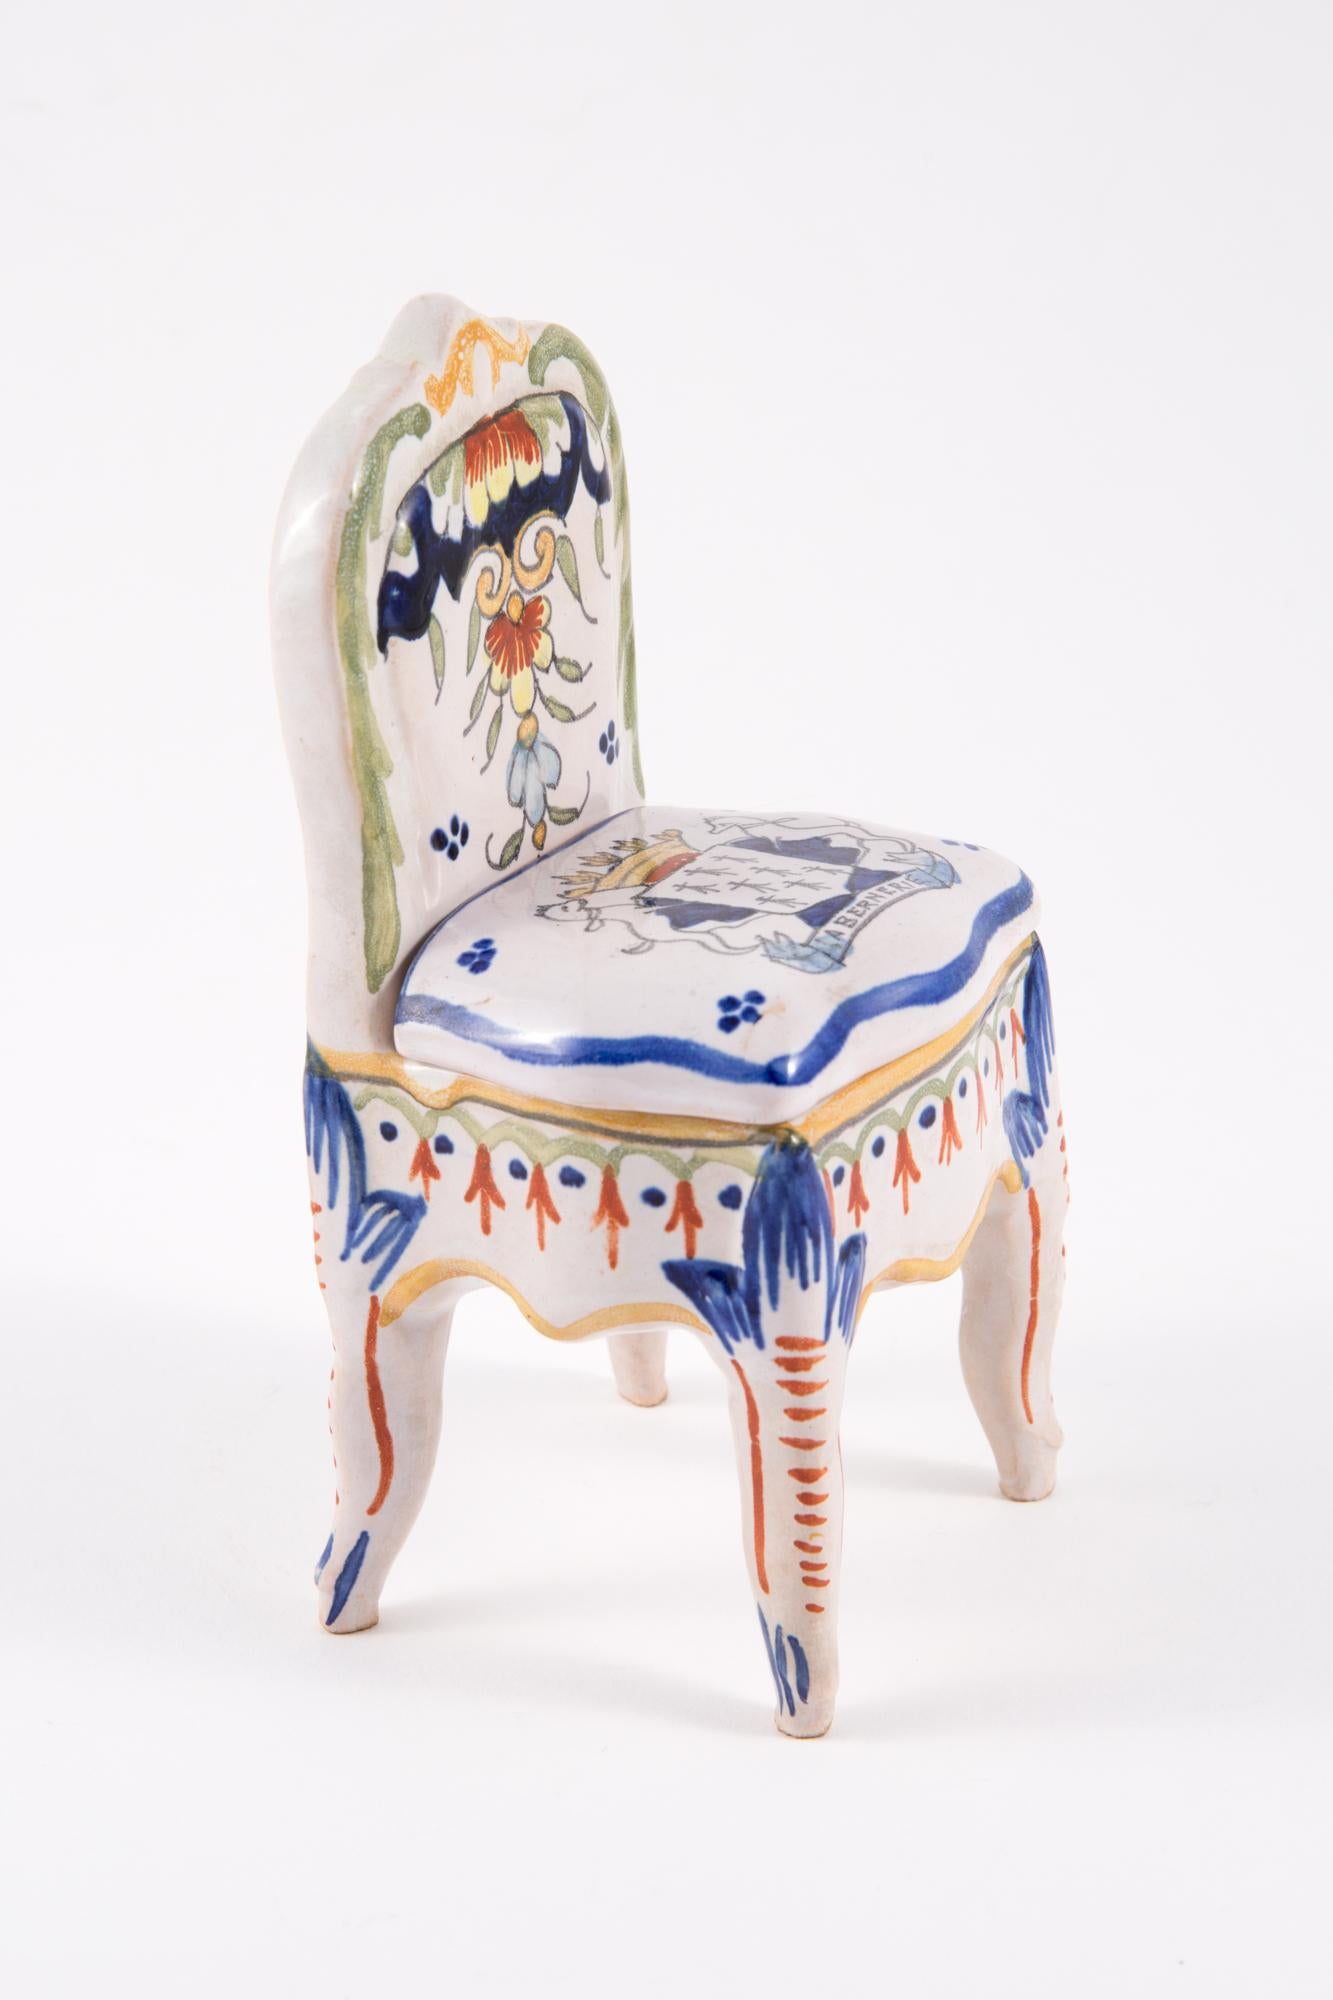 Porcelain armchair shaped jewelry box featuring a faience decorated, a under stamp.
In good vintage condition. Made in France. 
Maxi Length 5.9in. (15cm)
Maxi Width 2.7in (7cm)
We guarantee you will receive this gorgeous item as described and showed